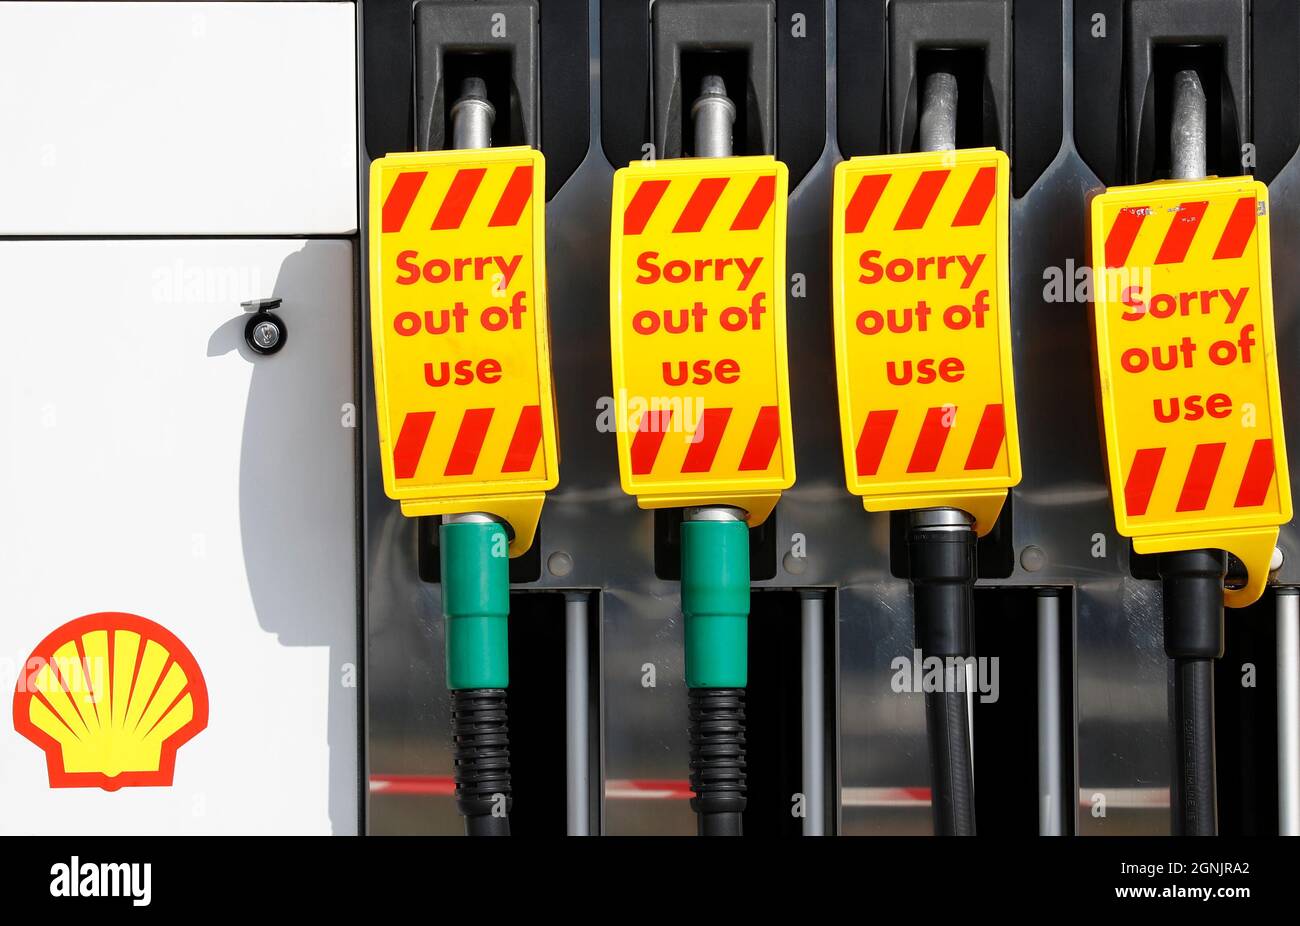 Loughborough, Leicestershire, UK. 26th Sep, 2021. Out of use signs hang from fuel pumps at a Shell petrol station after the government urged people to carry on buying petrol as normal, despite supply problems that have closed some stations. Credit: Darren Staples/Alamy Live News Stock Photo